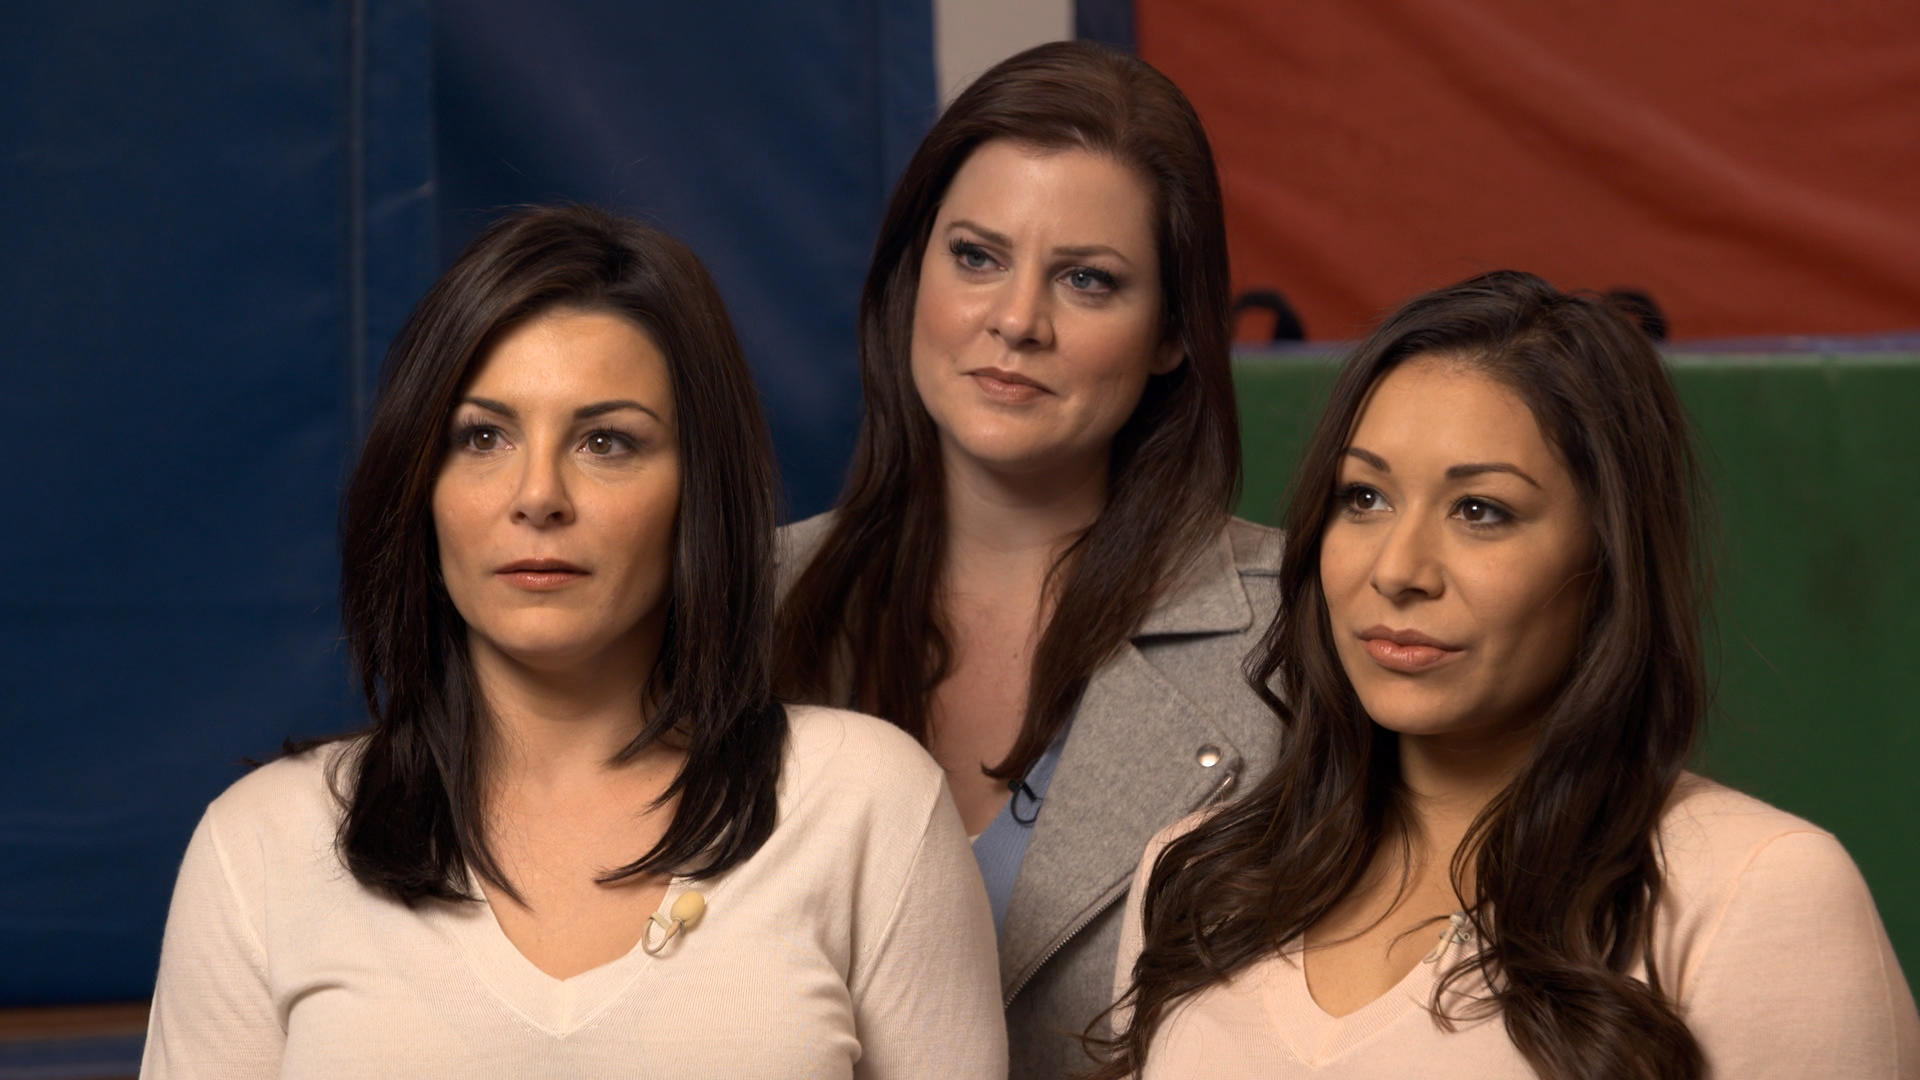 Former Team USA gymnasts describe doctors alleged sexual abuse